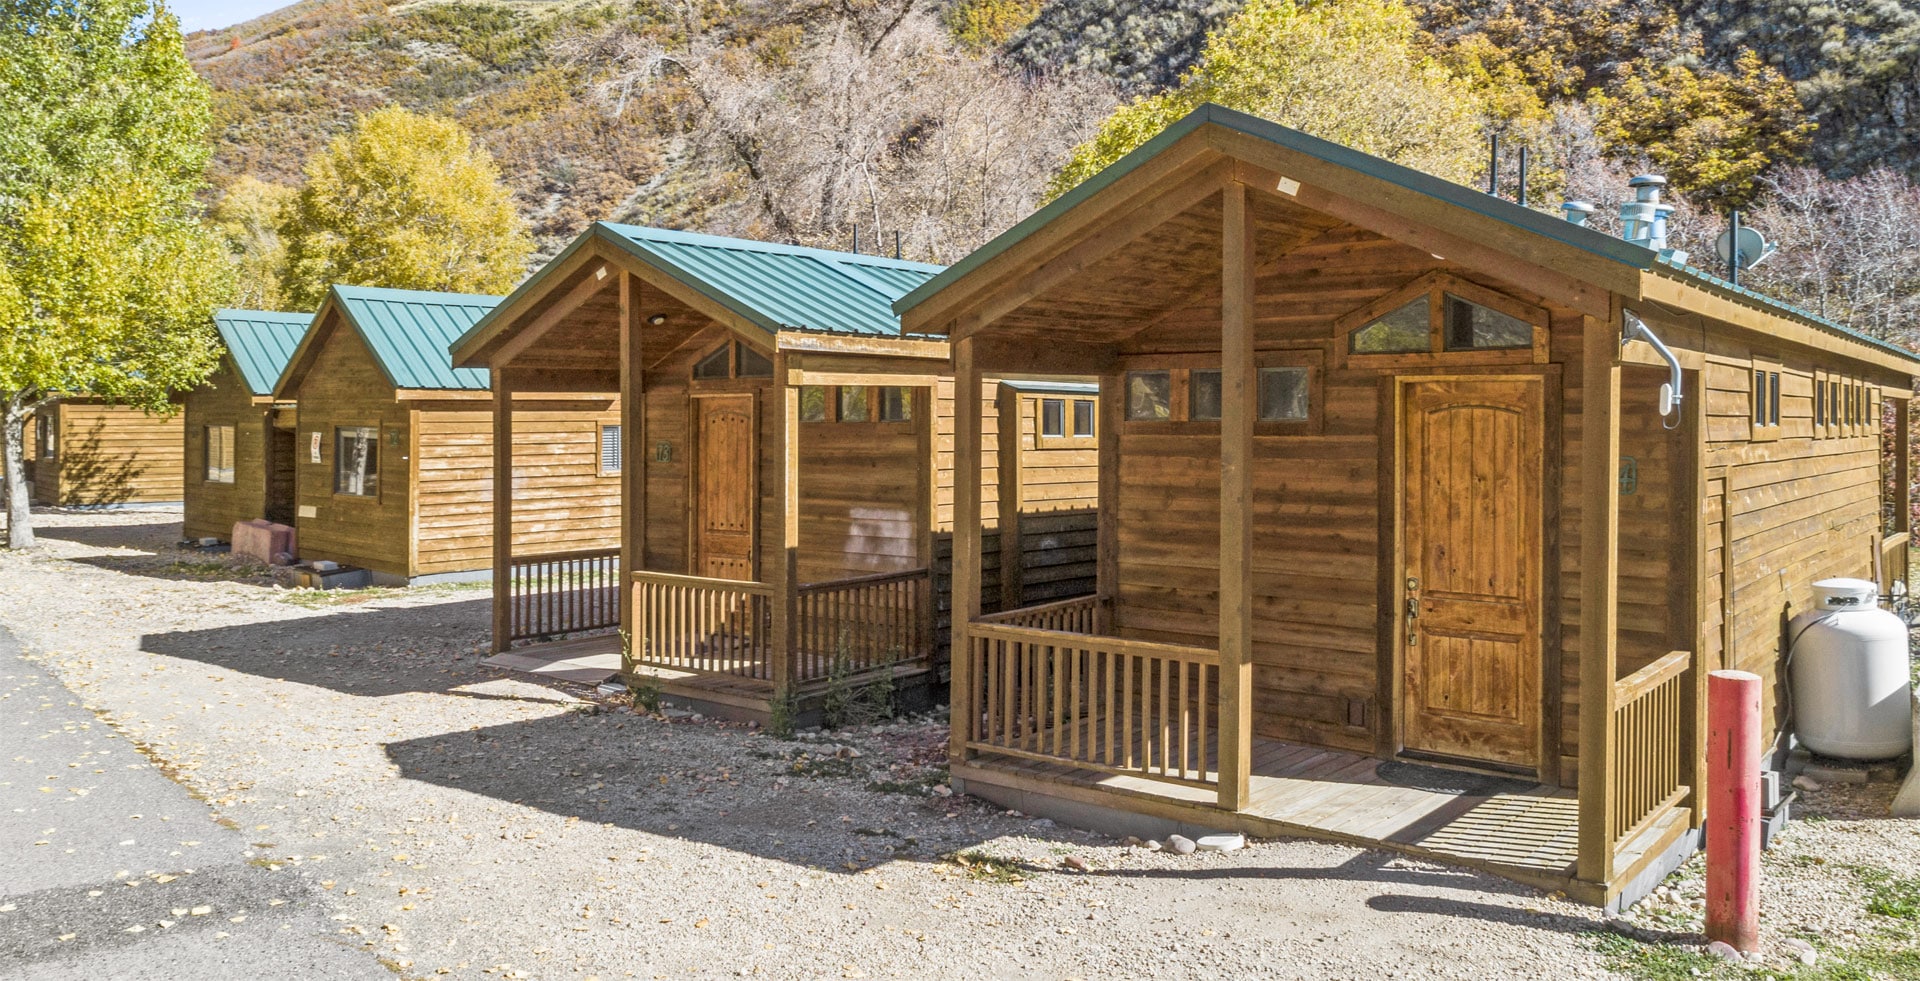 Cabin options at River's Edge